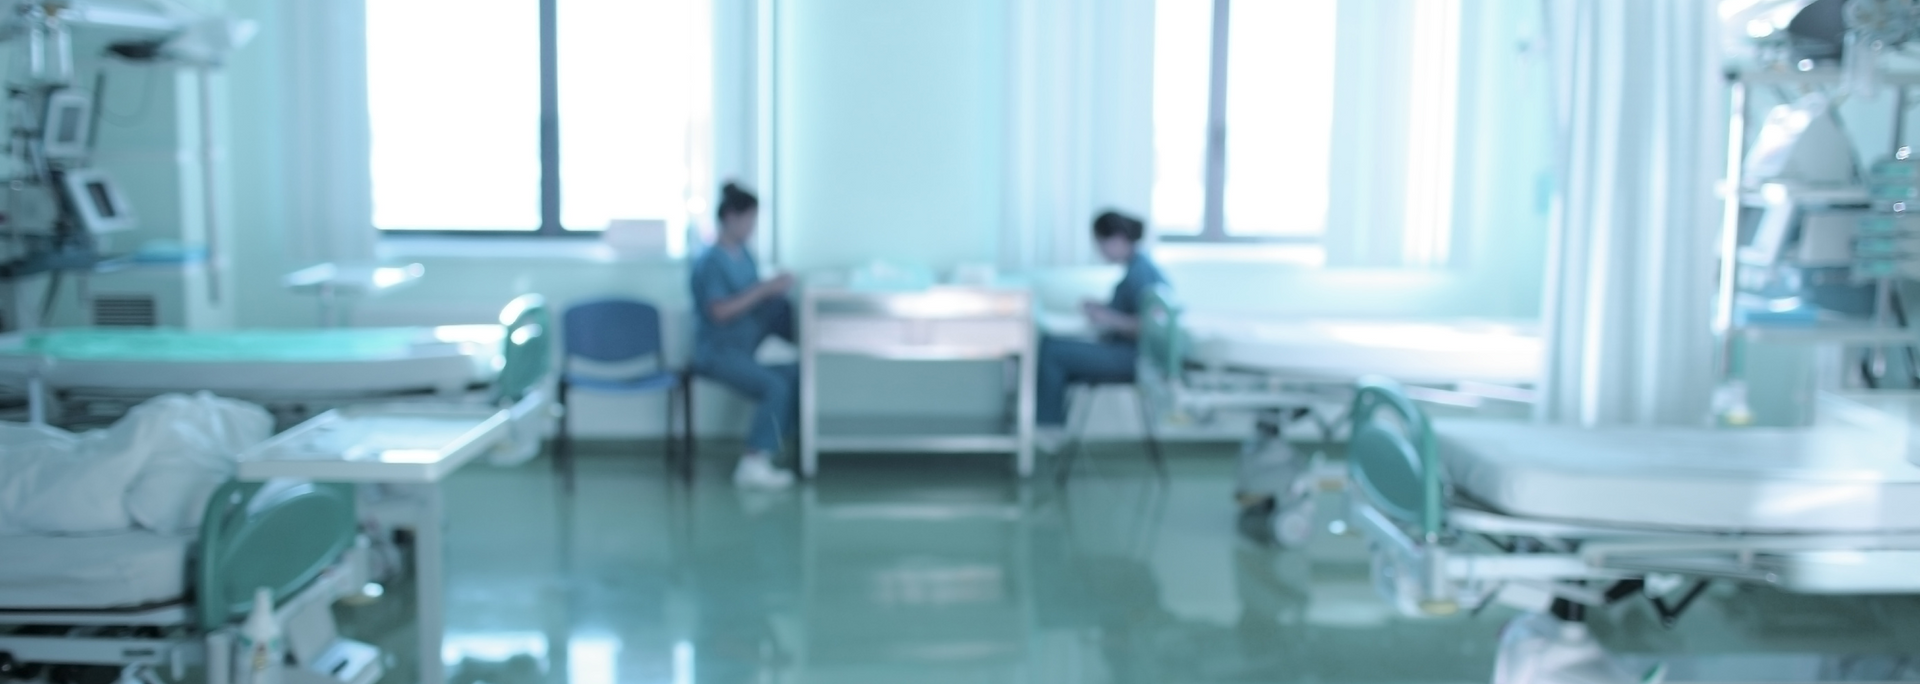 Picture of a Hospital ward